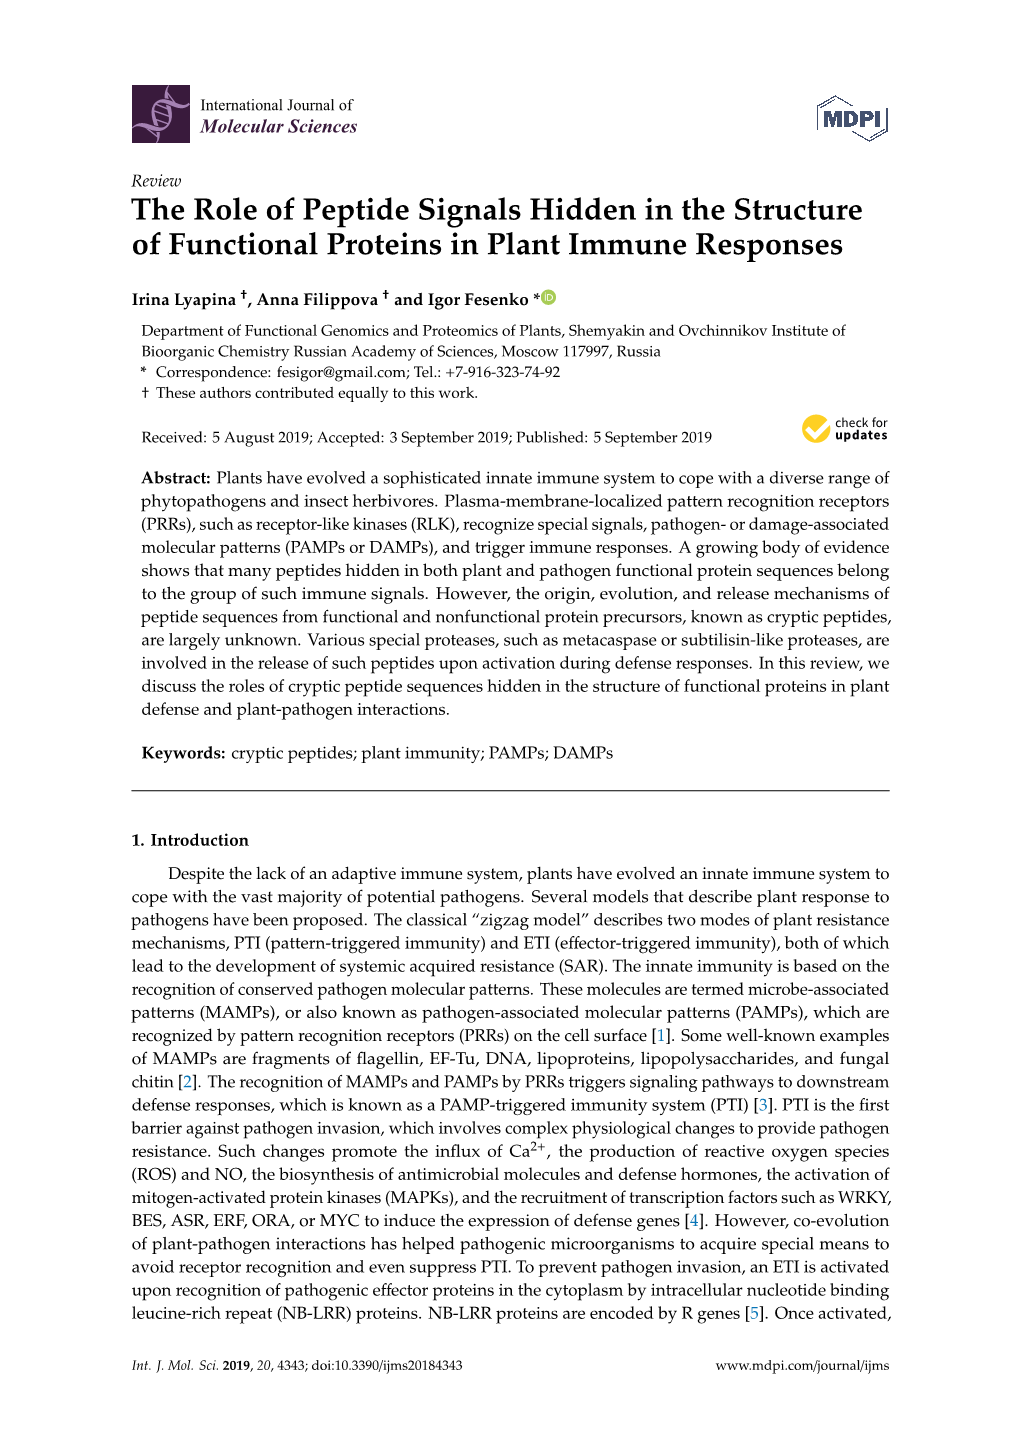 The Role of Peptide Signals Hidden in the Structure of Functional Proteins in Plant Immune Responses